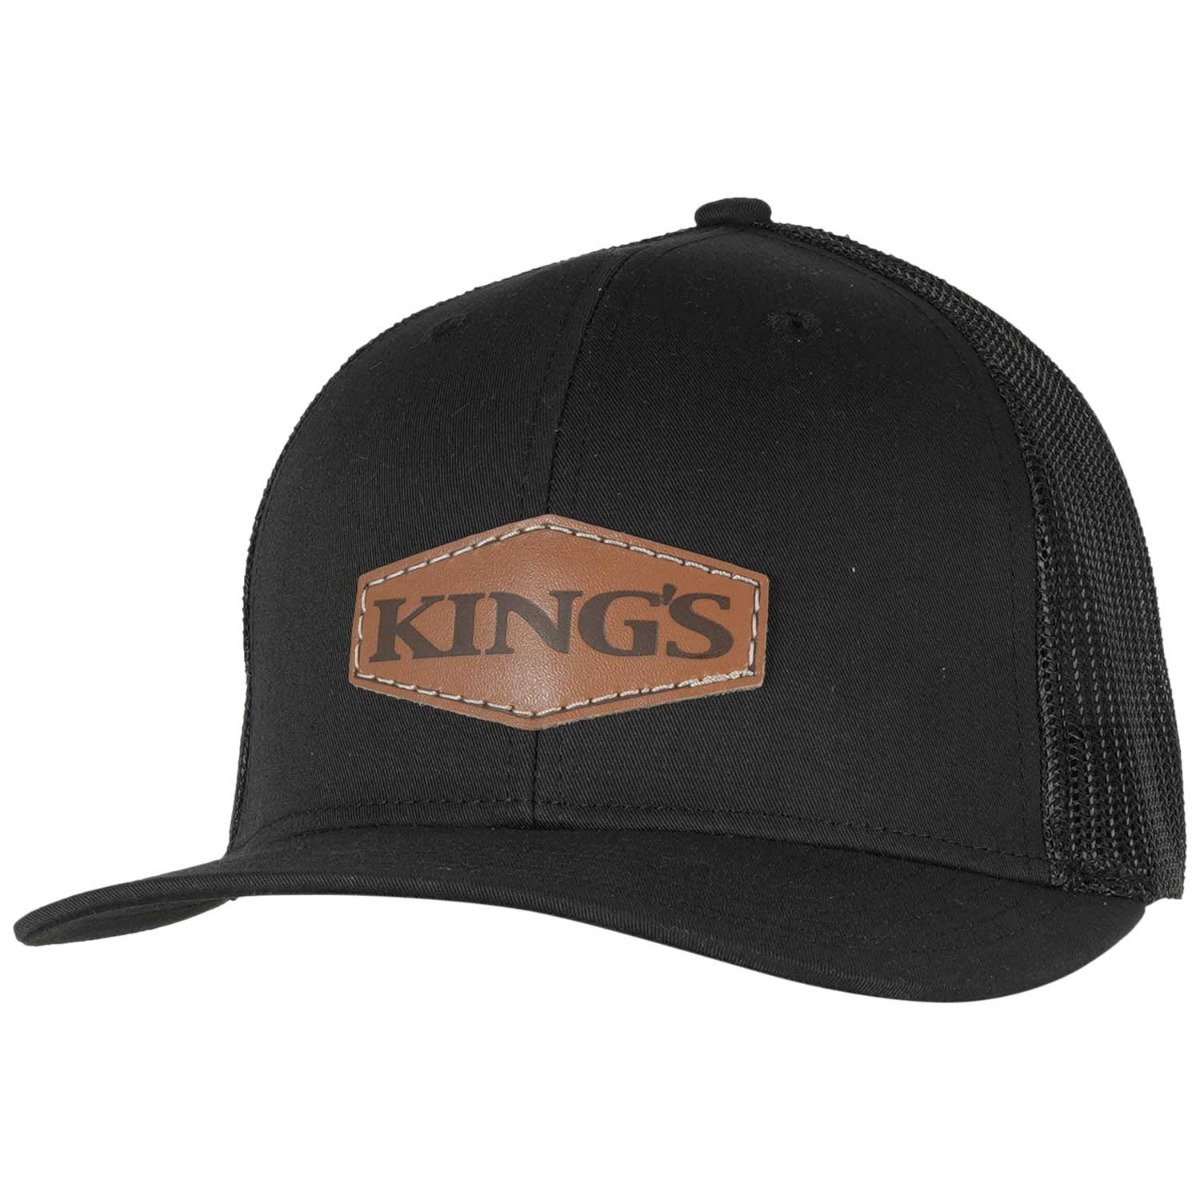 King's Camo Dark Leather Hexagon Patch Hat